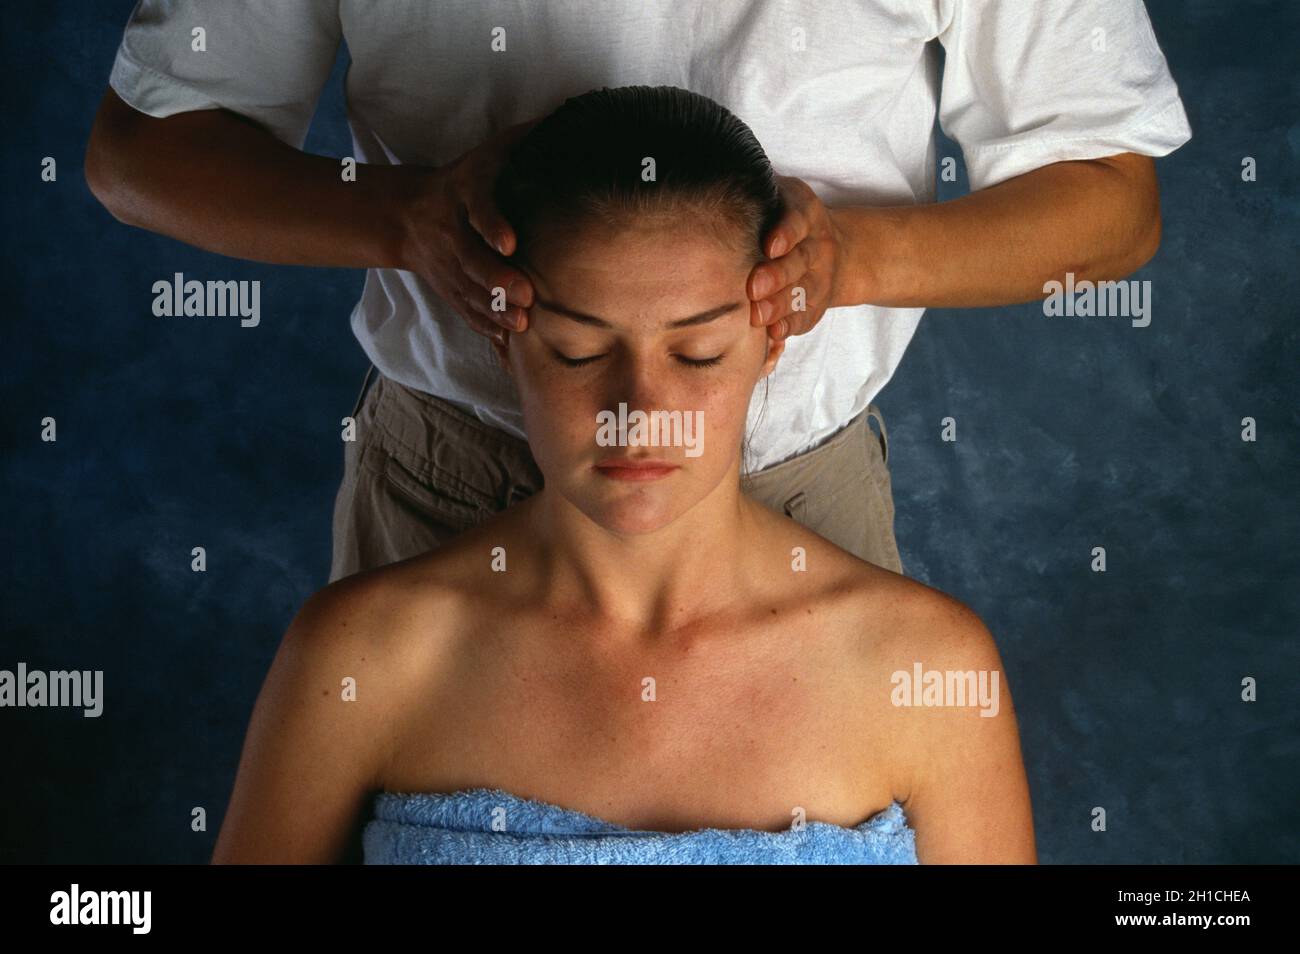 Physiotherapist massaging young woman's head. Stock Photo